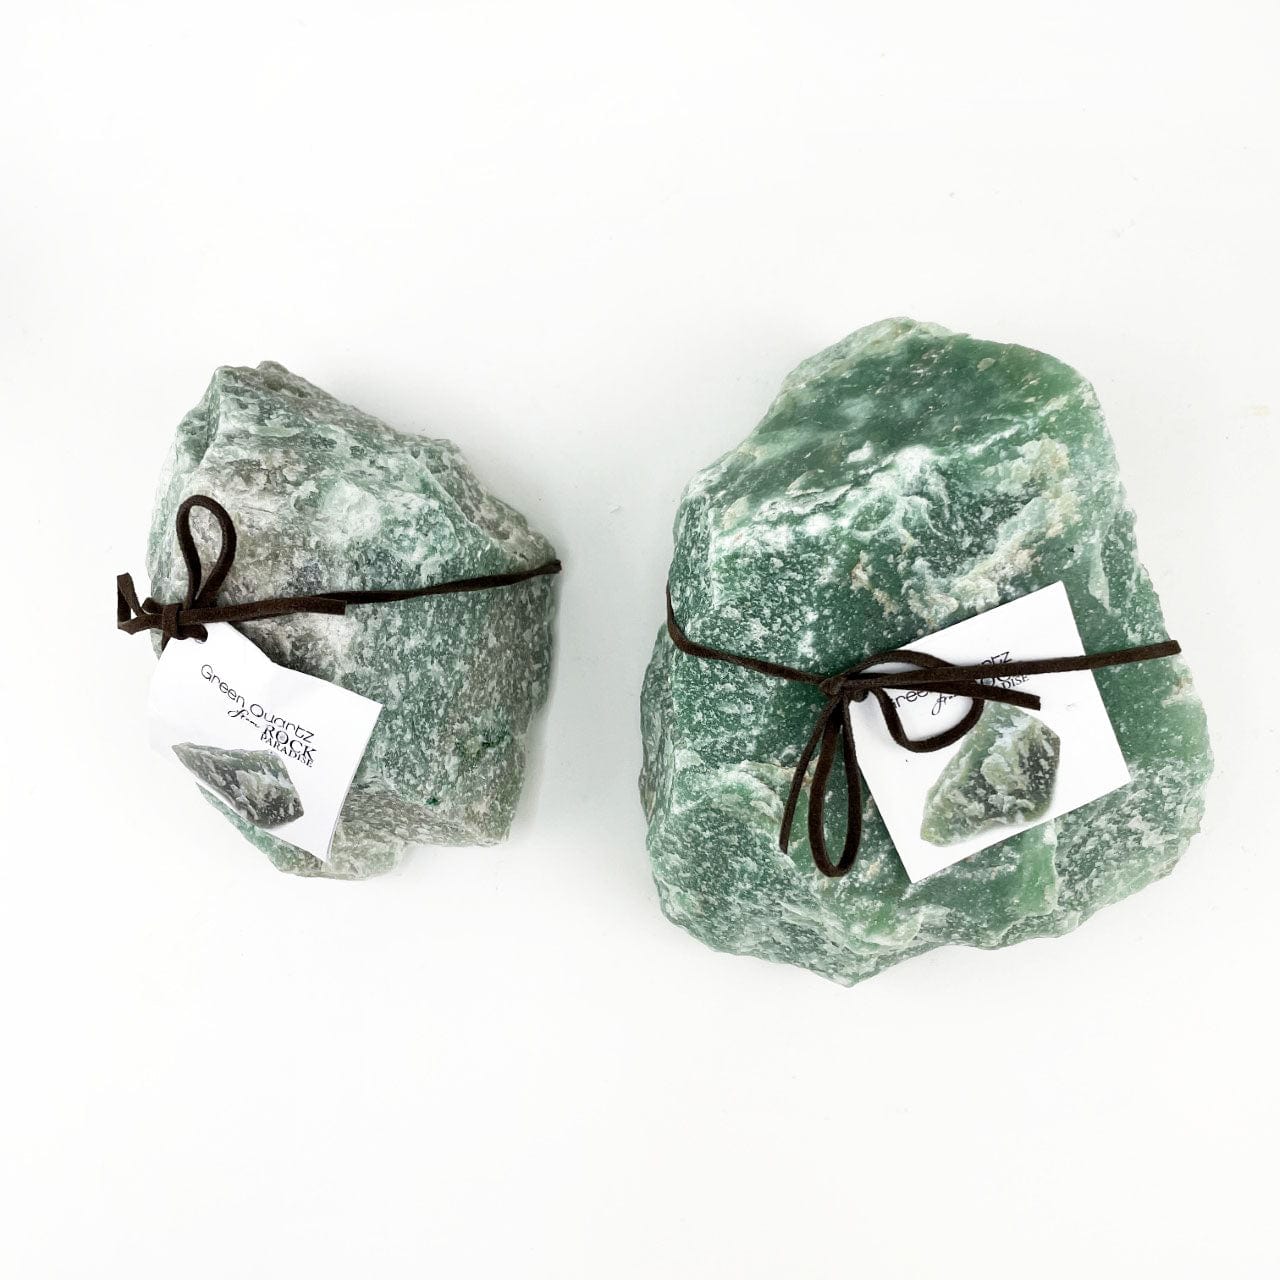 the 2 sizes of green quartz stone tied and tagged with stone info card